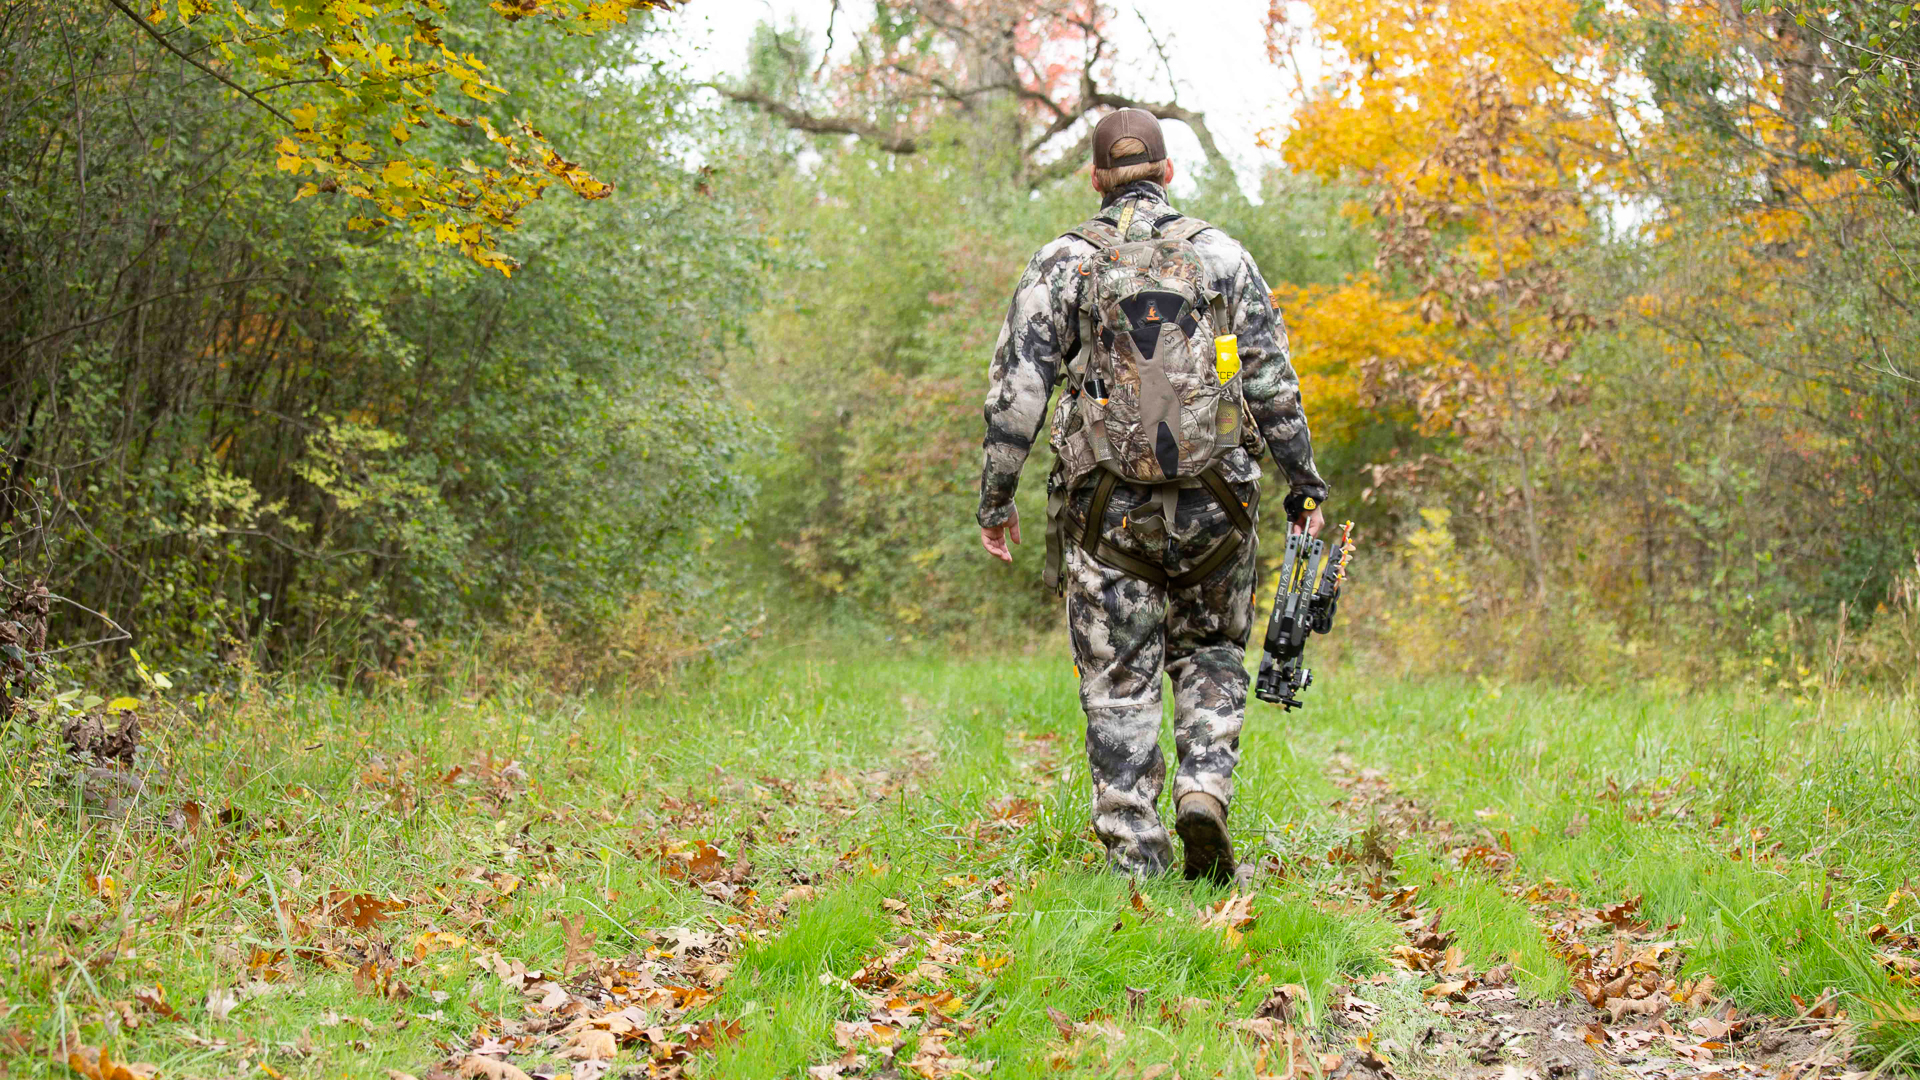 Top 10 Most Hunter Friendly States